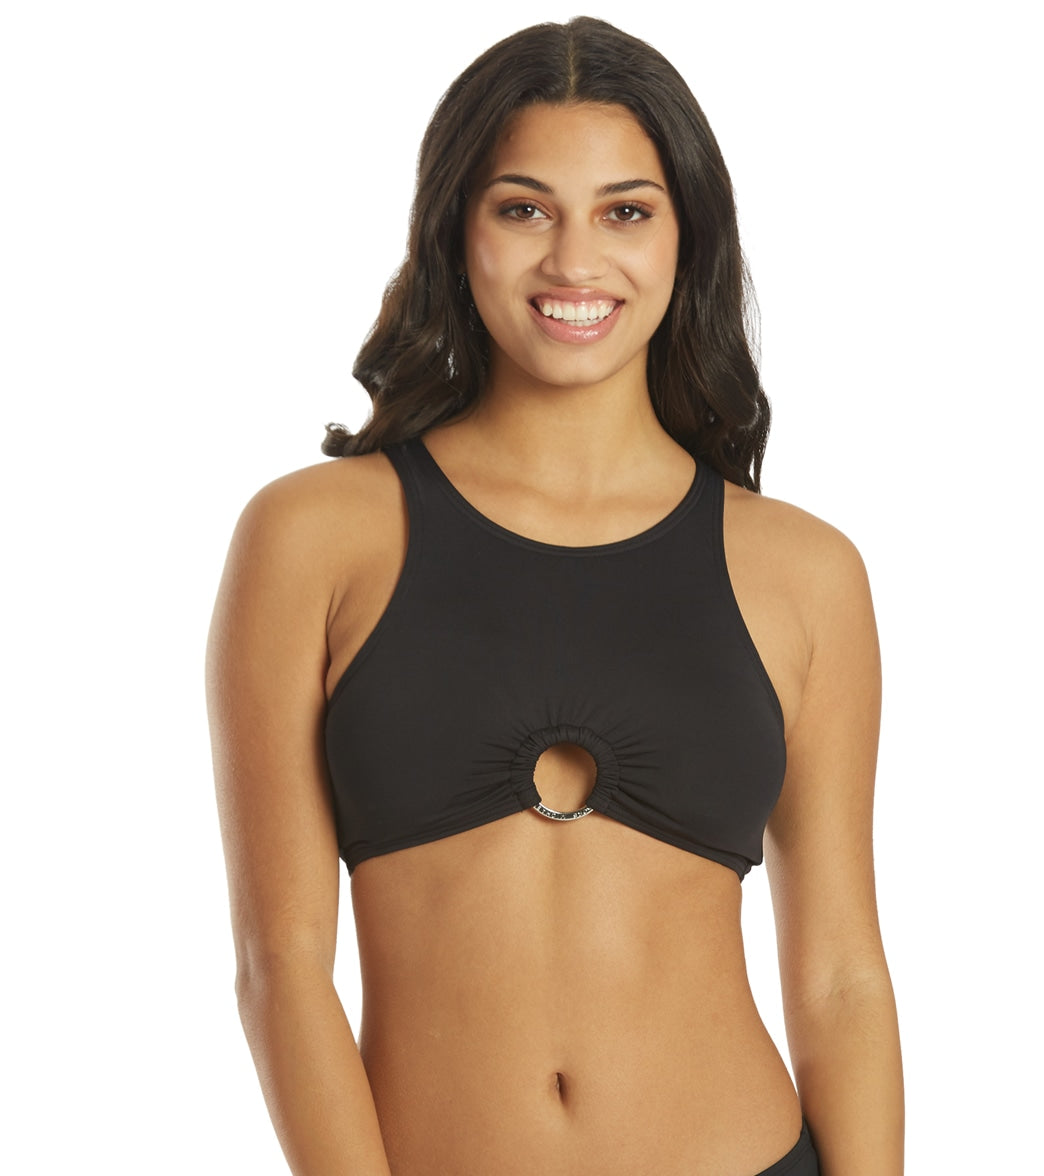 Michael Kors Women's Iconic Solid Cropped Bikini Top at